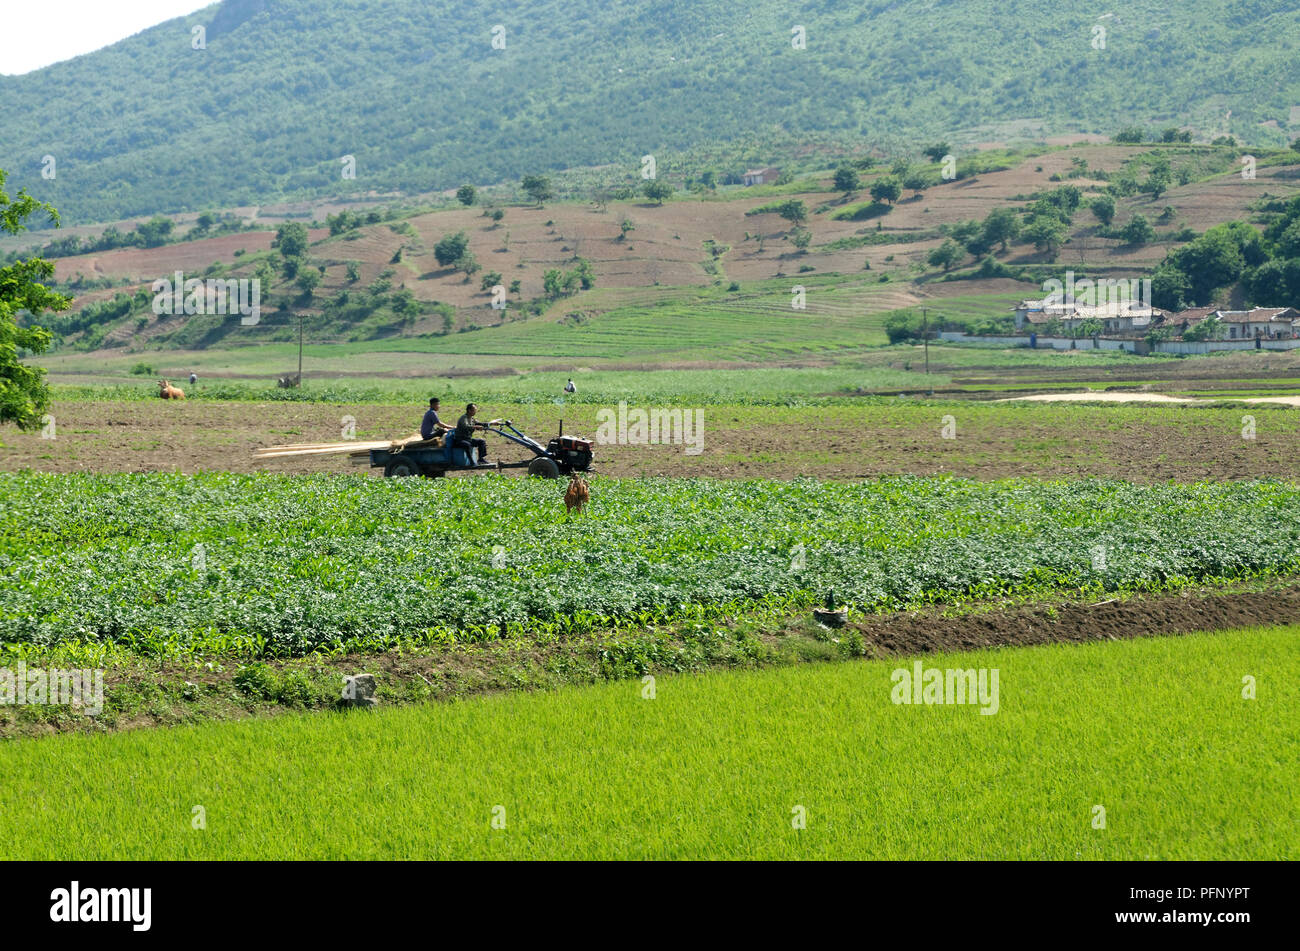 North korea, two men driving a small tractor across a rice field Stock Photo